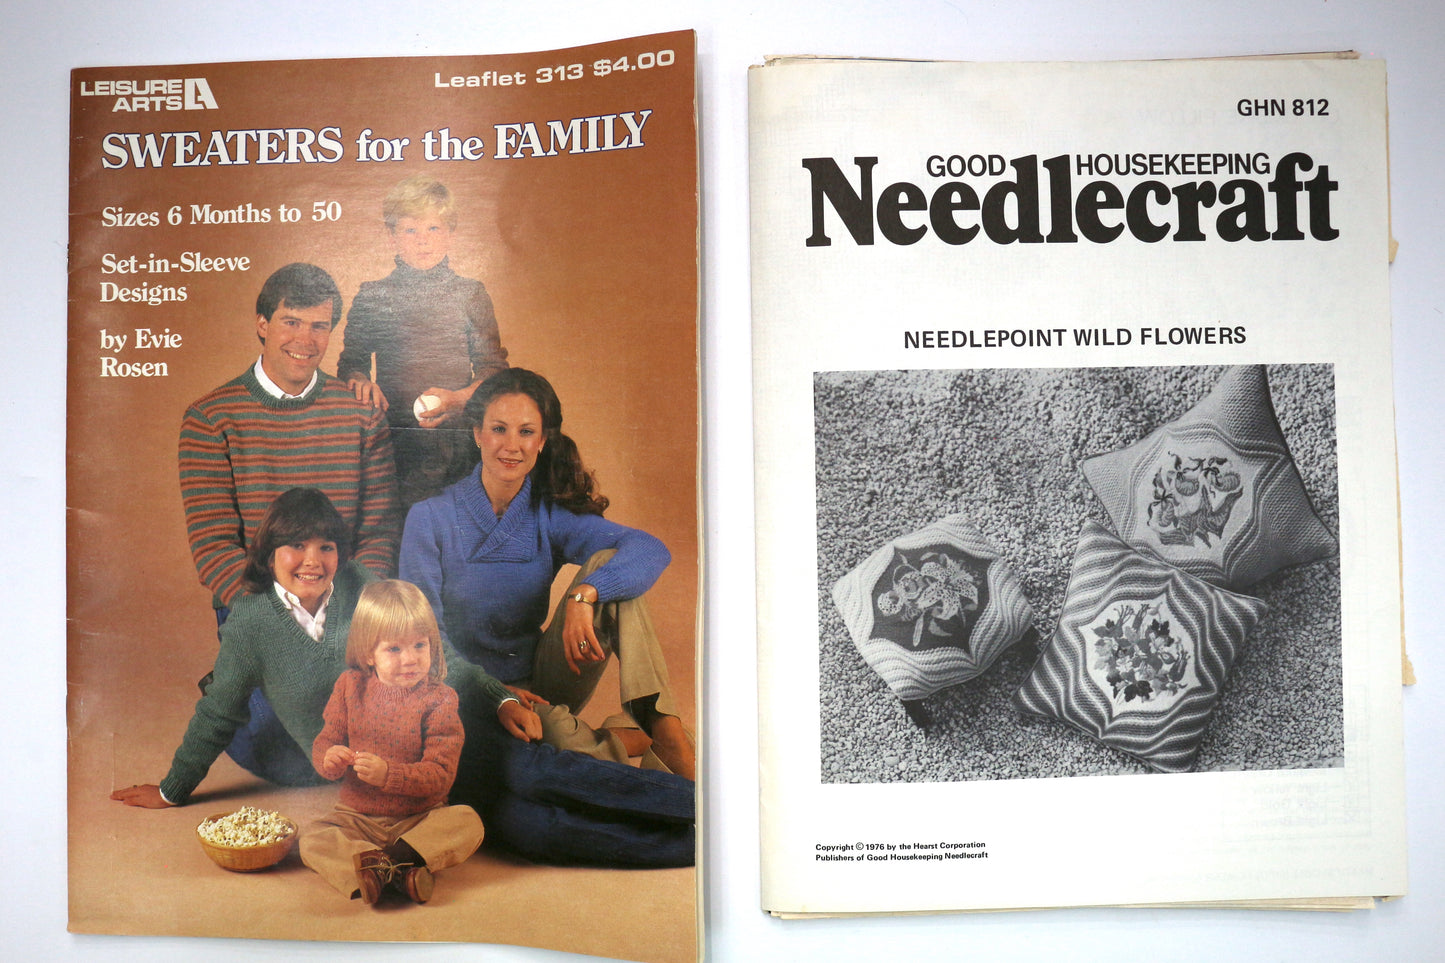 Leisure Arts Sweaters for the Family or Good Housekeeping Needlecraft needlepoint Wild Flowers